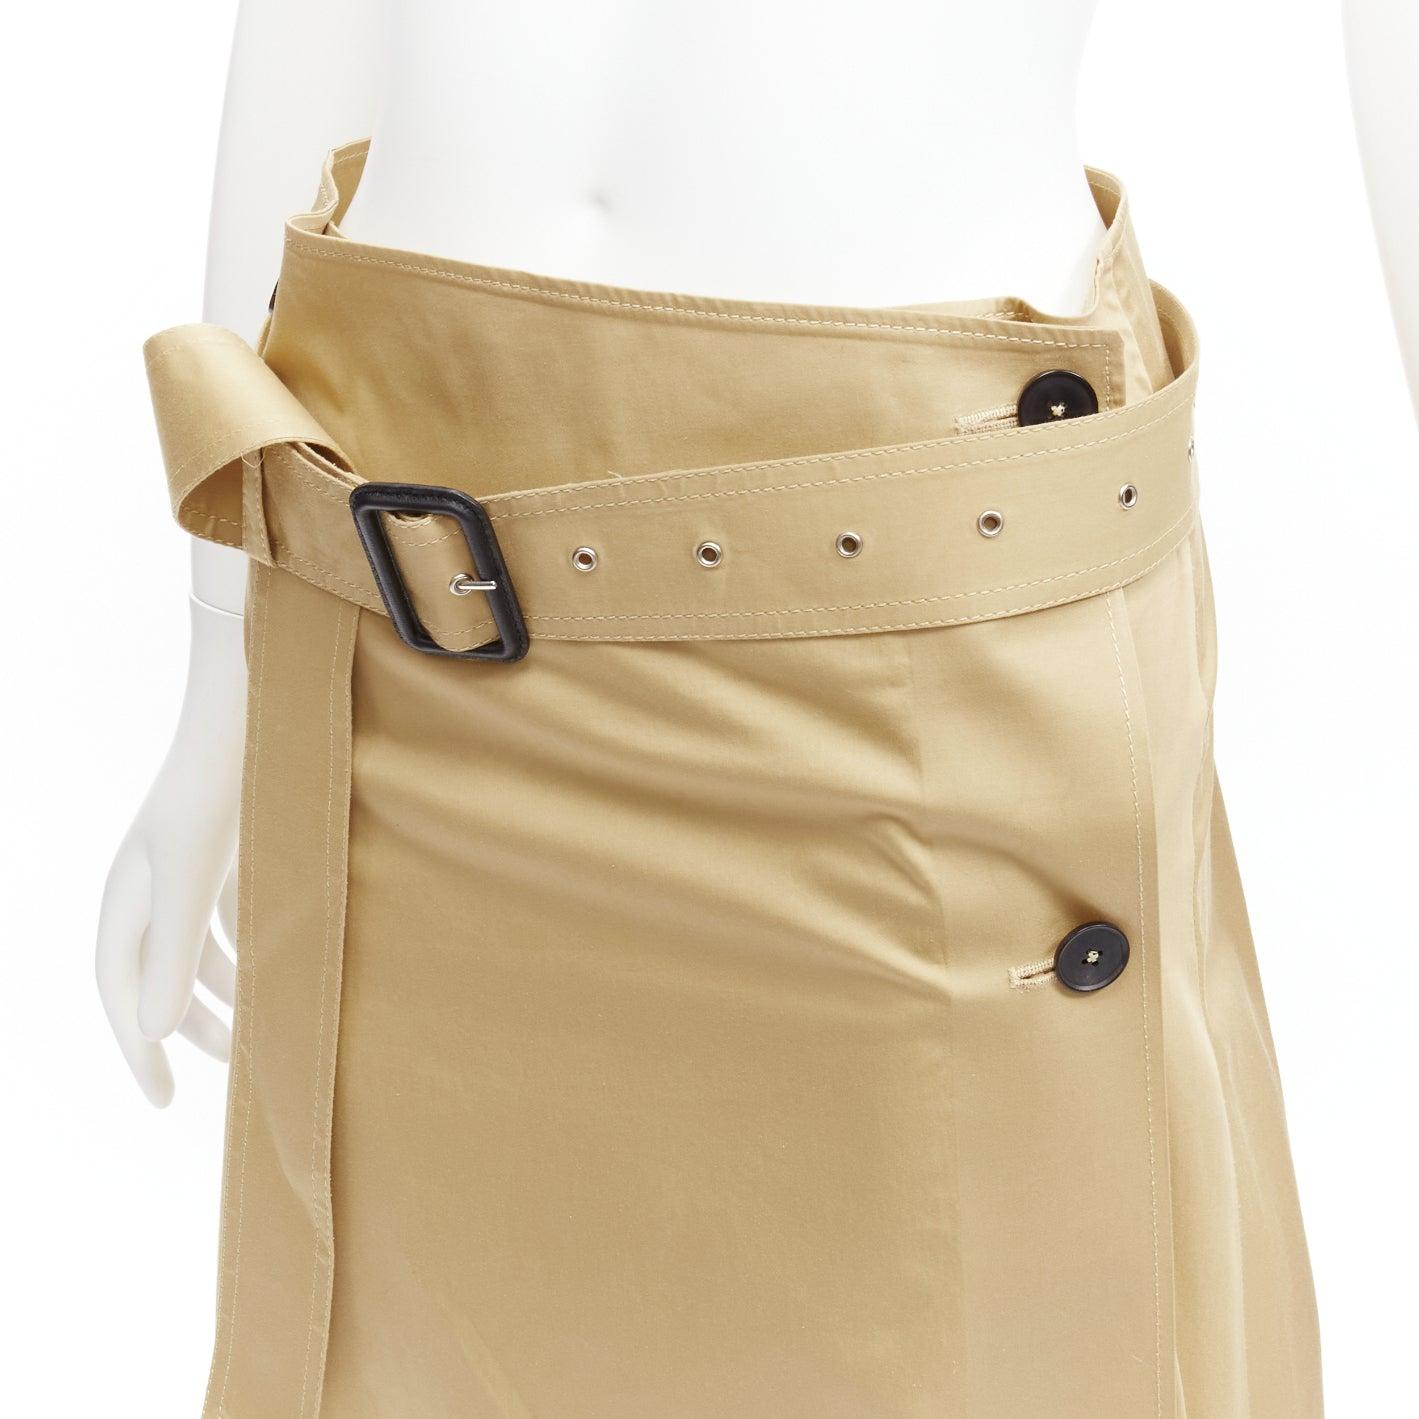 JOSEPH khaki cotton military safari belted trench inspired A-line wrap skirt FR34 XS
Reference: SNKO/A00316
Brand: Joseph
Material: Cotton
Color: Khaki
Pattern: Solid
Closure: Button
Extra Details: Wrap and button closure. Belt is detachable.
Made